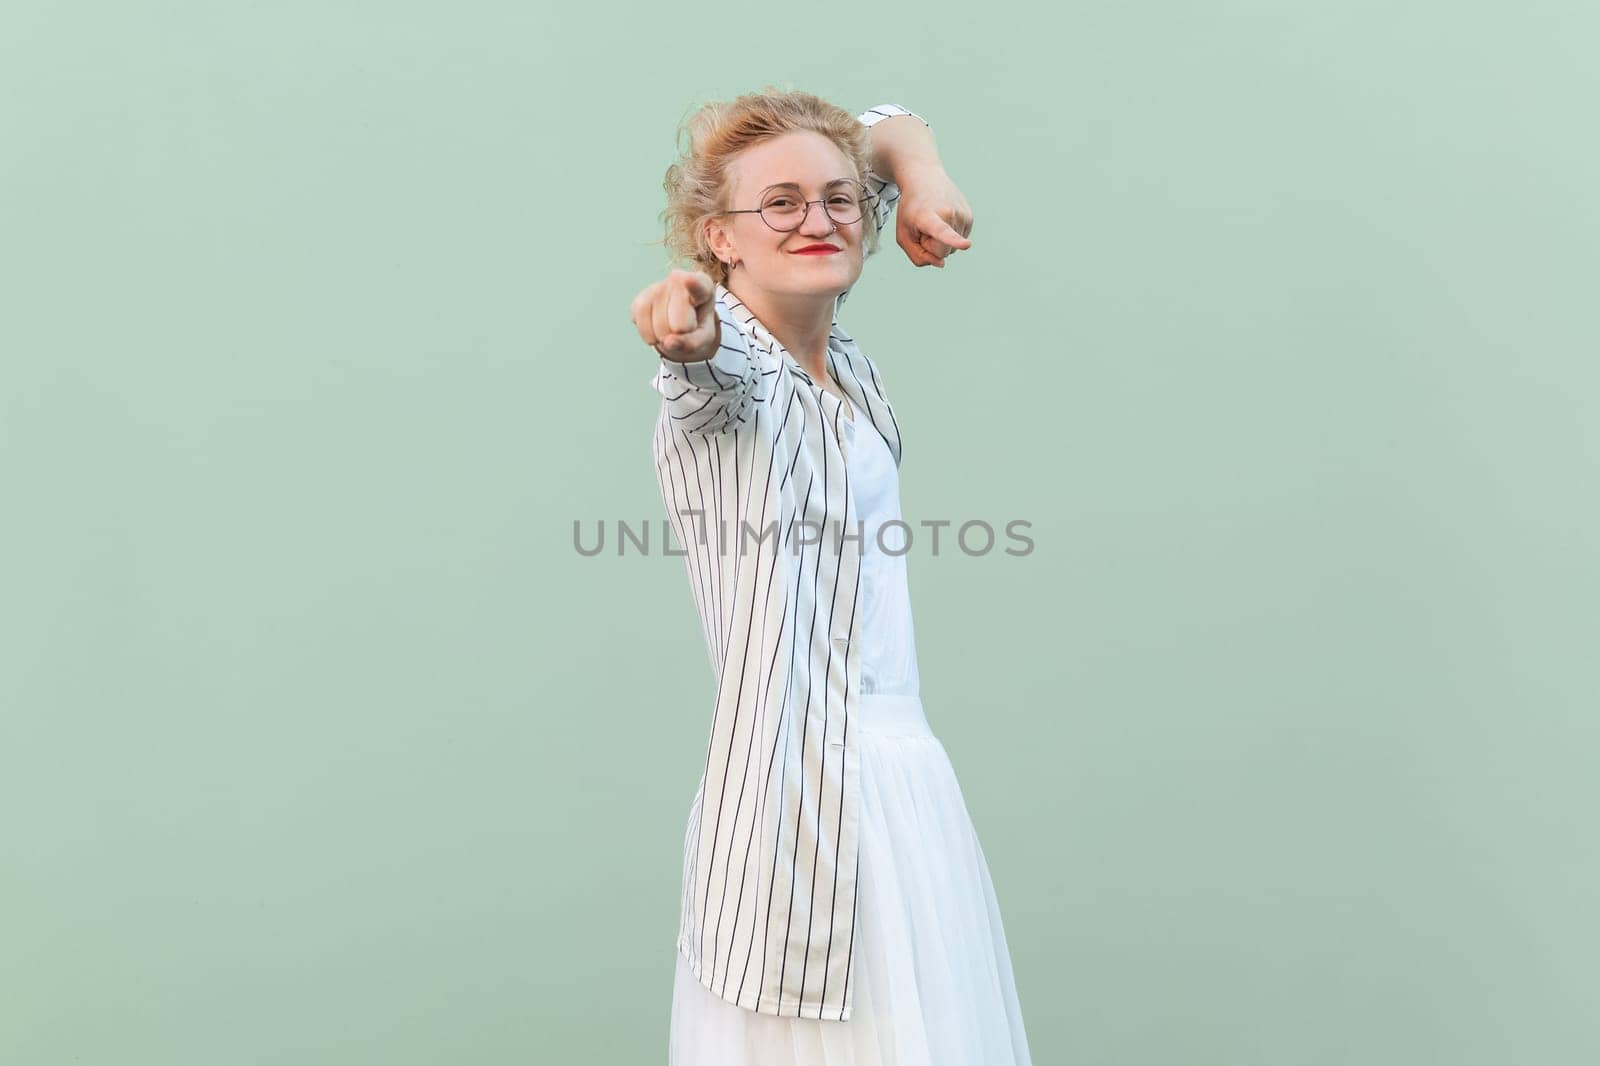 Portrait of joyful cheerful positive blonde woman wearing striped shirt and skirt, pointing index finger to camera, choosing you. Indoor studio shot isolated on light green background.